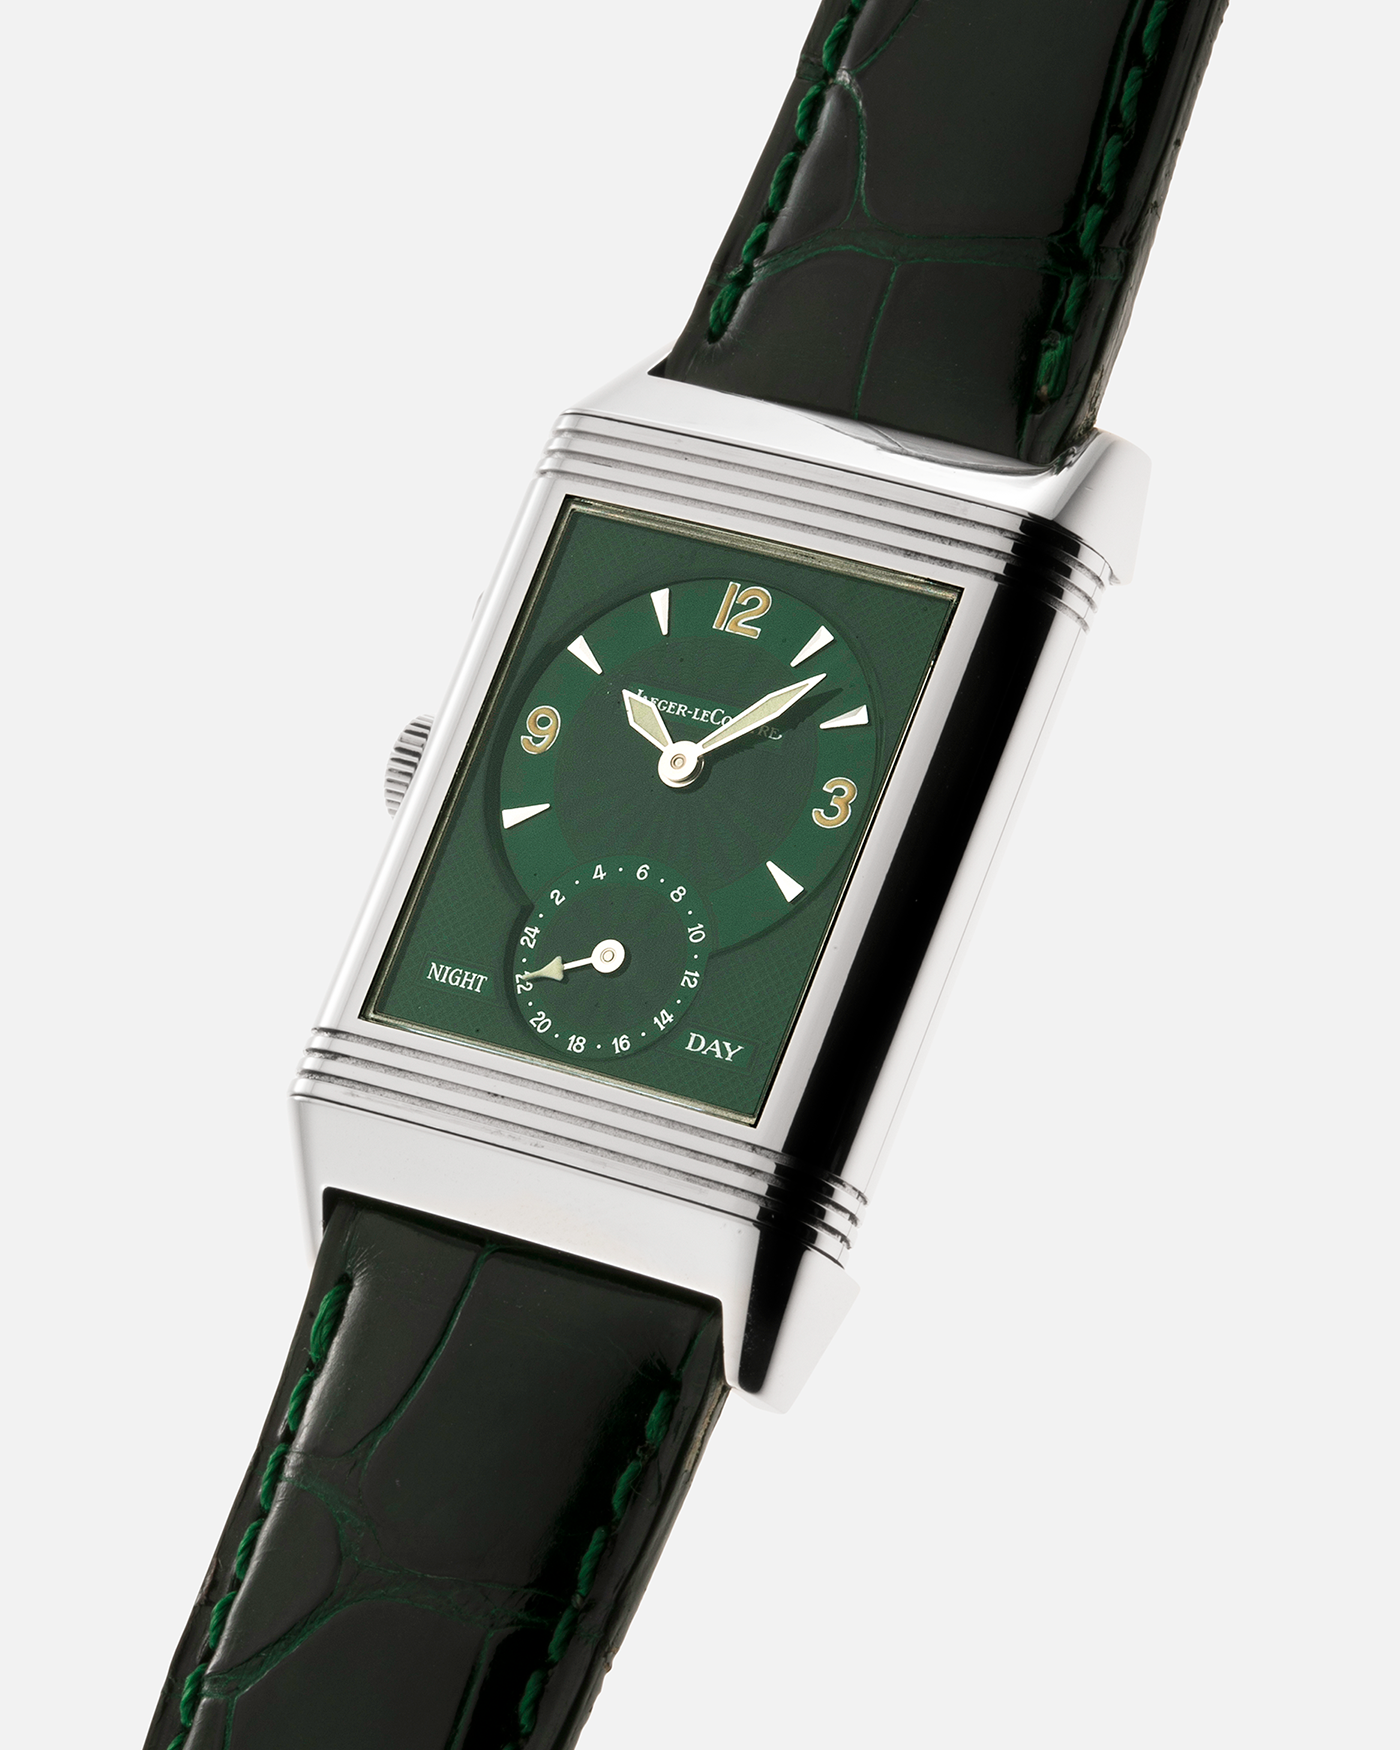 Brand: Jaeger-LeCoultre Year: 1999 Model: Reverso Duo Serie Premier, Ref. 270.8.54 Green Japan Edition Material: Stainless Steel Movement: Cal. 854, Manual-Wind Case Diameter: 42 x 26mm Bracelet/Strap: Emerald Green Crocodile Leather Strap with Signed Stainless Steel Deployant Clasp